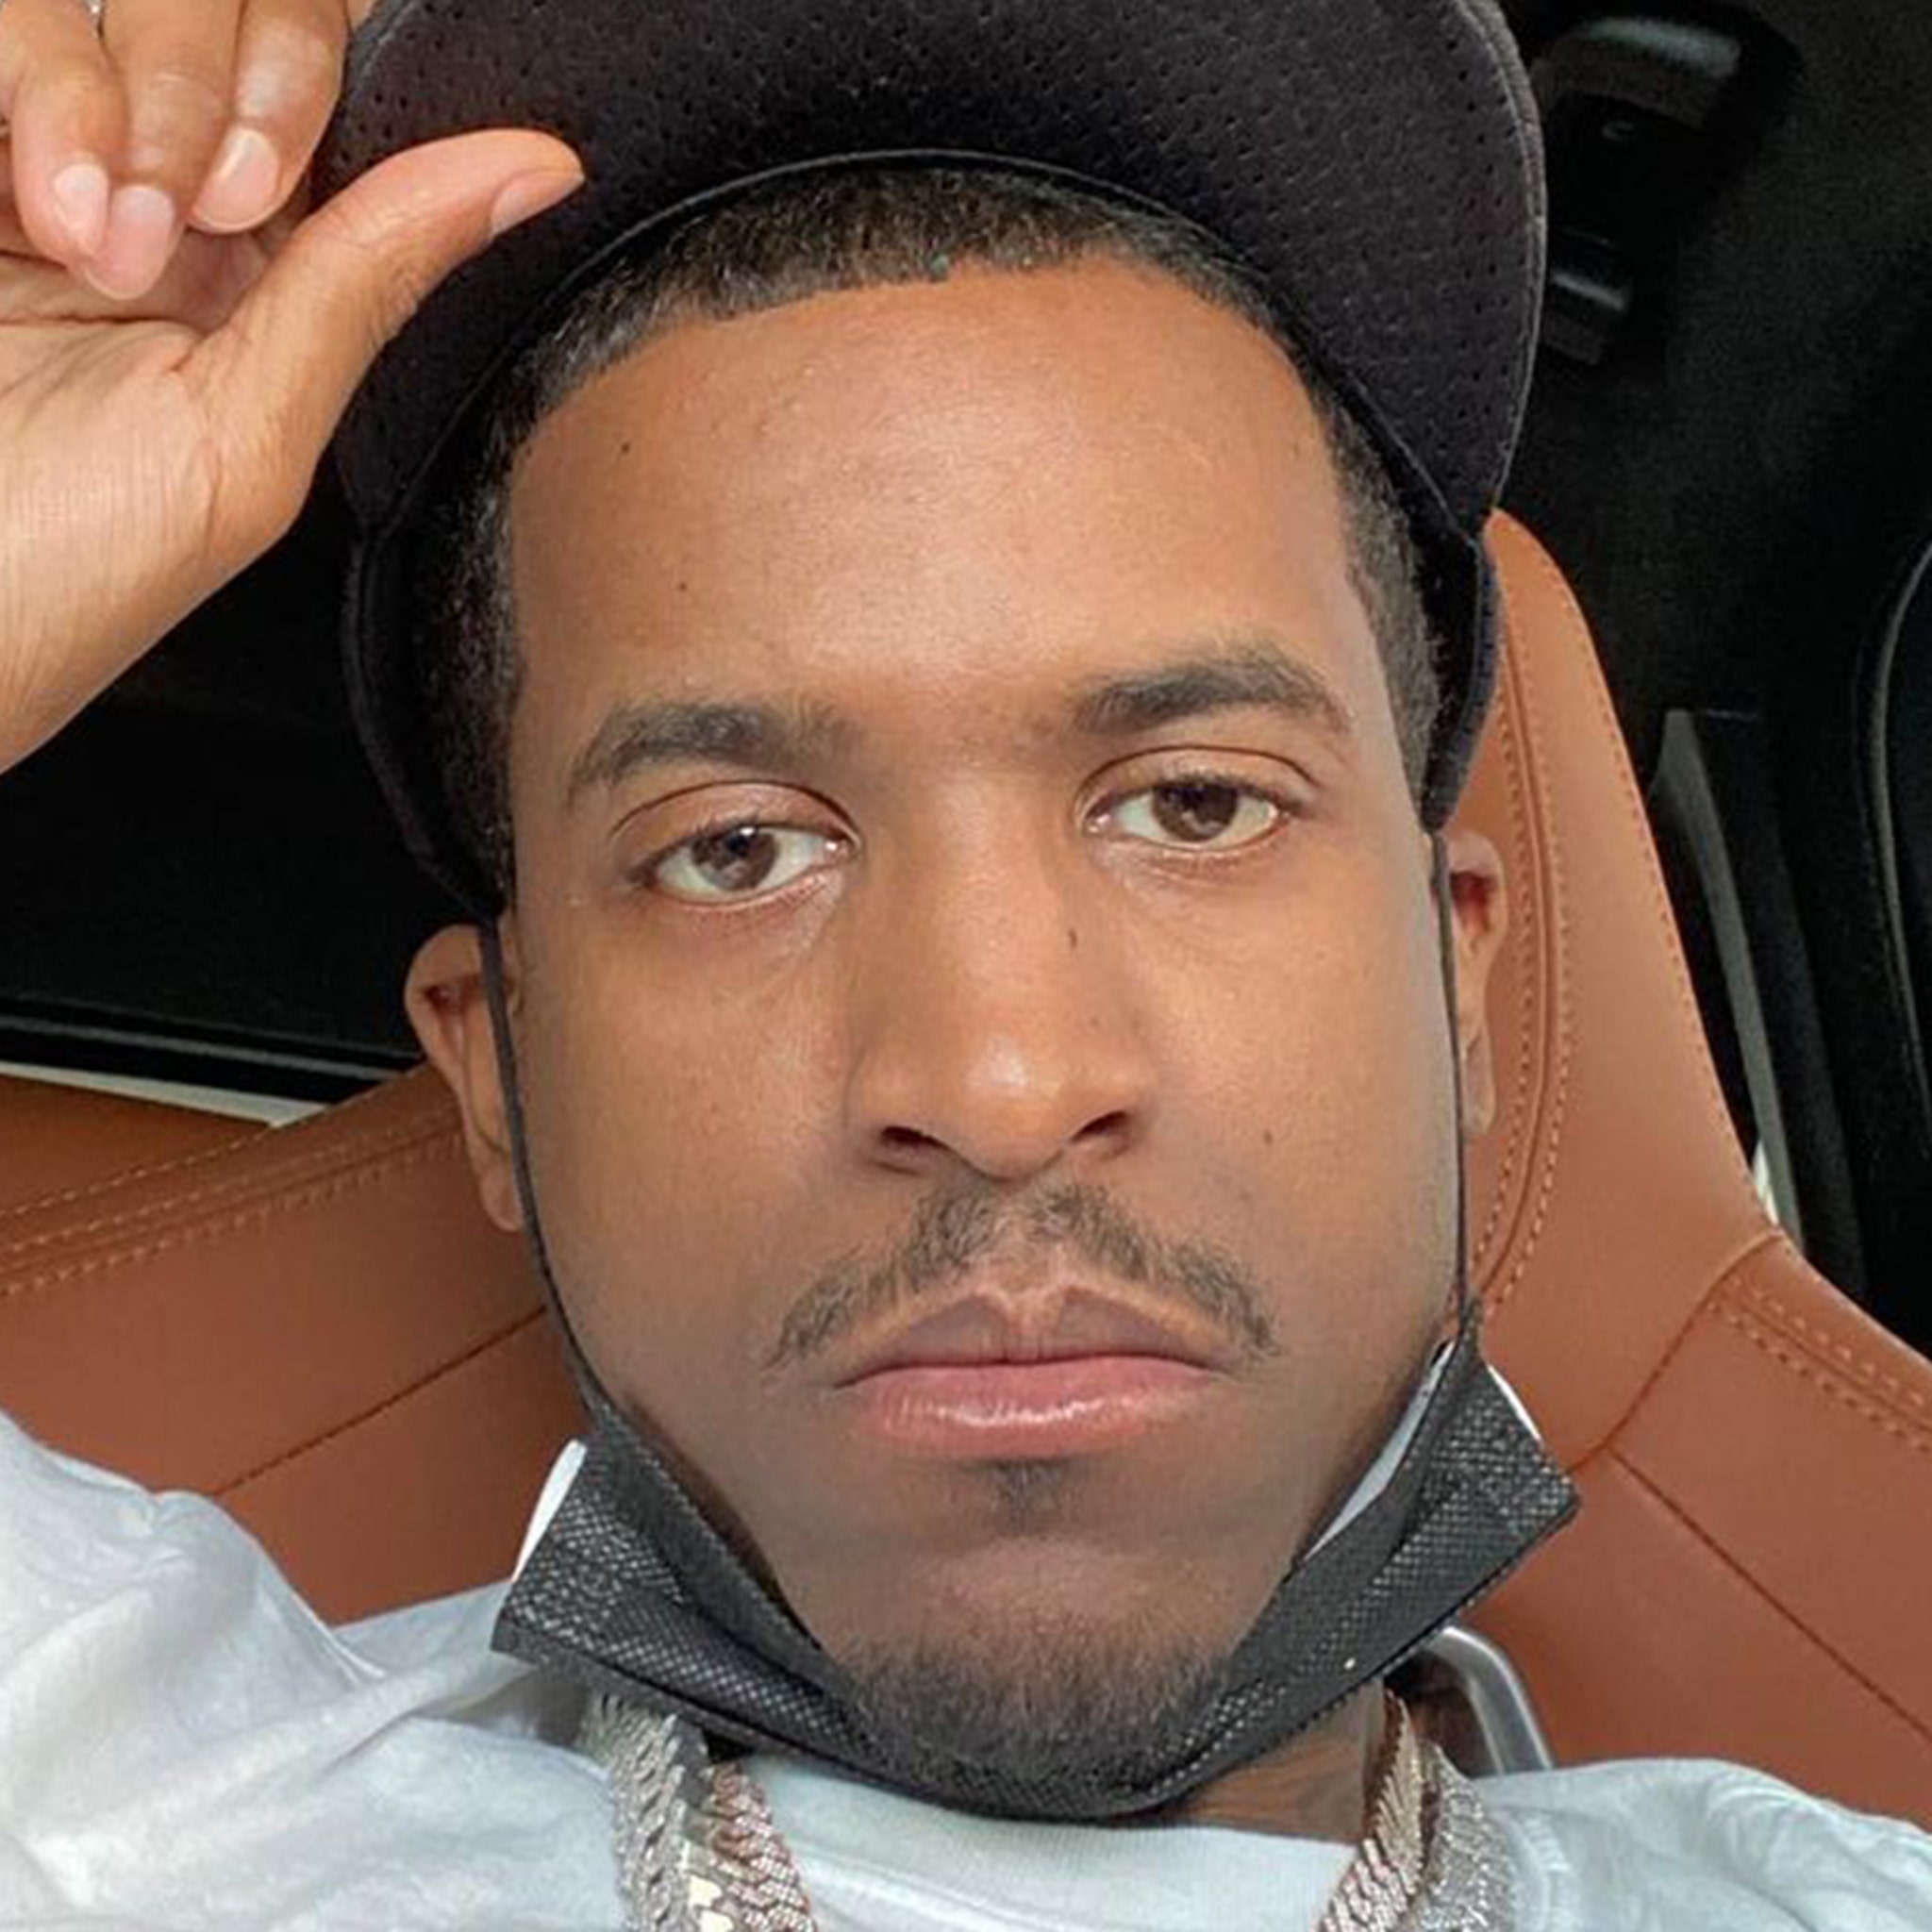 Lil Reese Grazed In Eye During Shooting Photos Of Bloody Aftermath